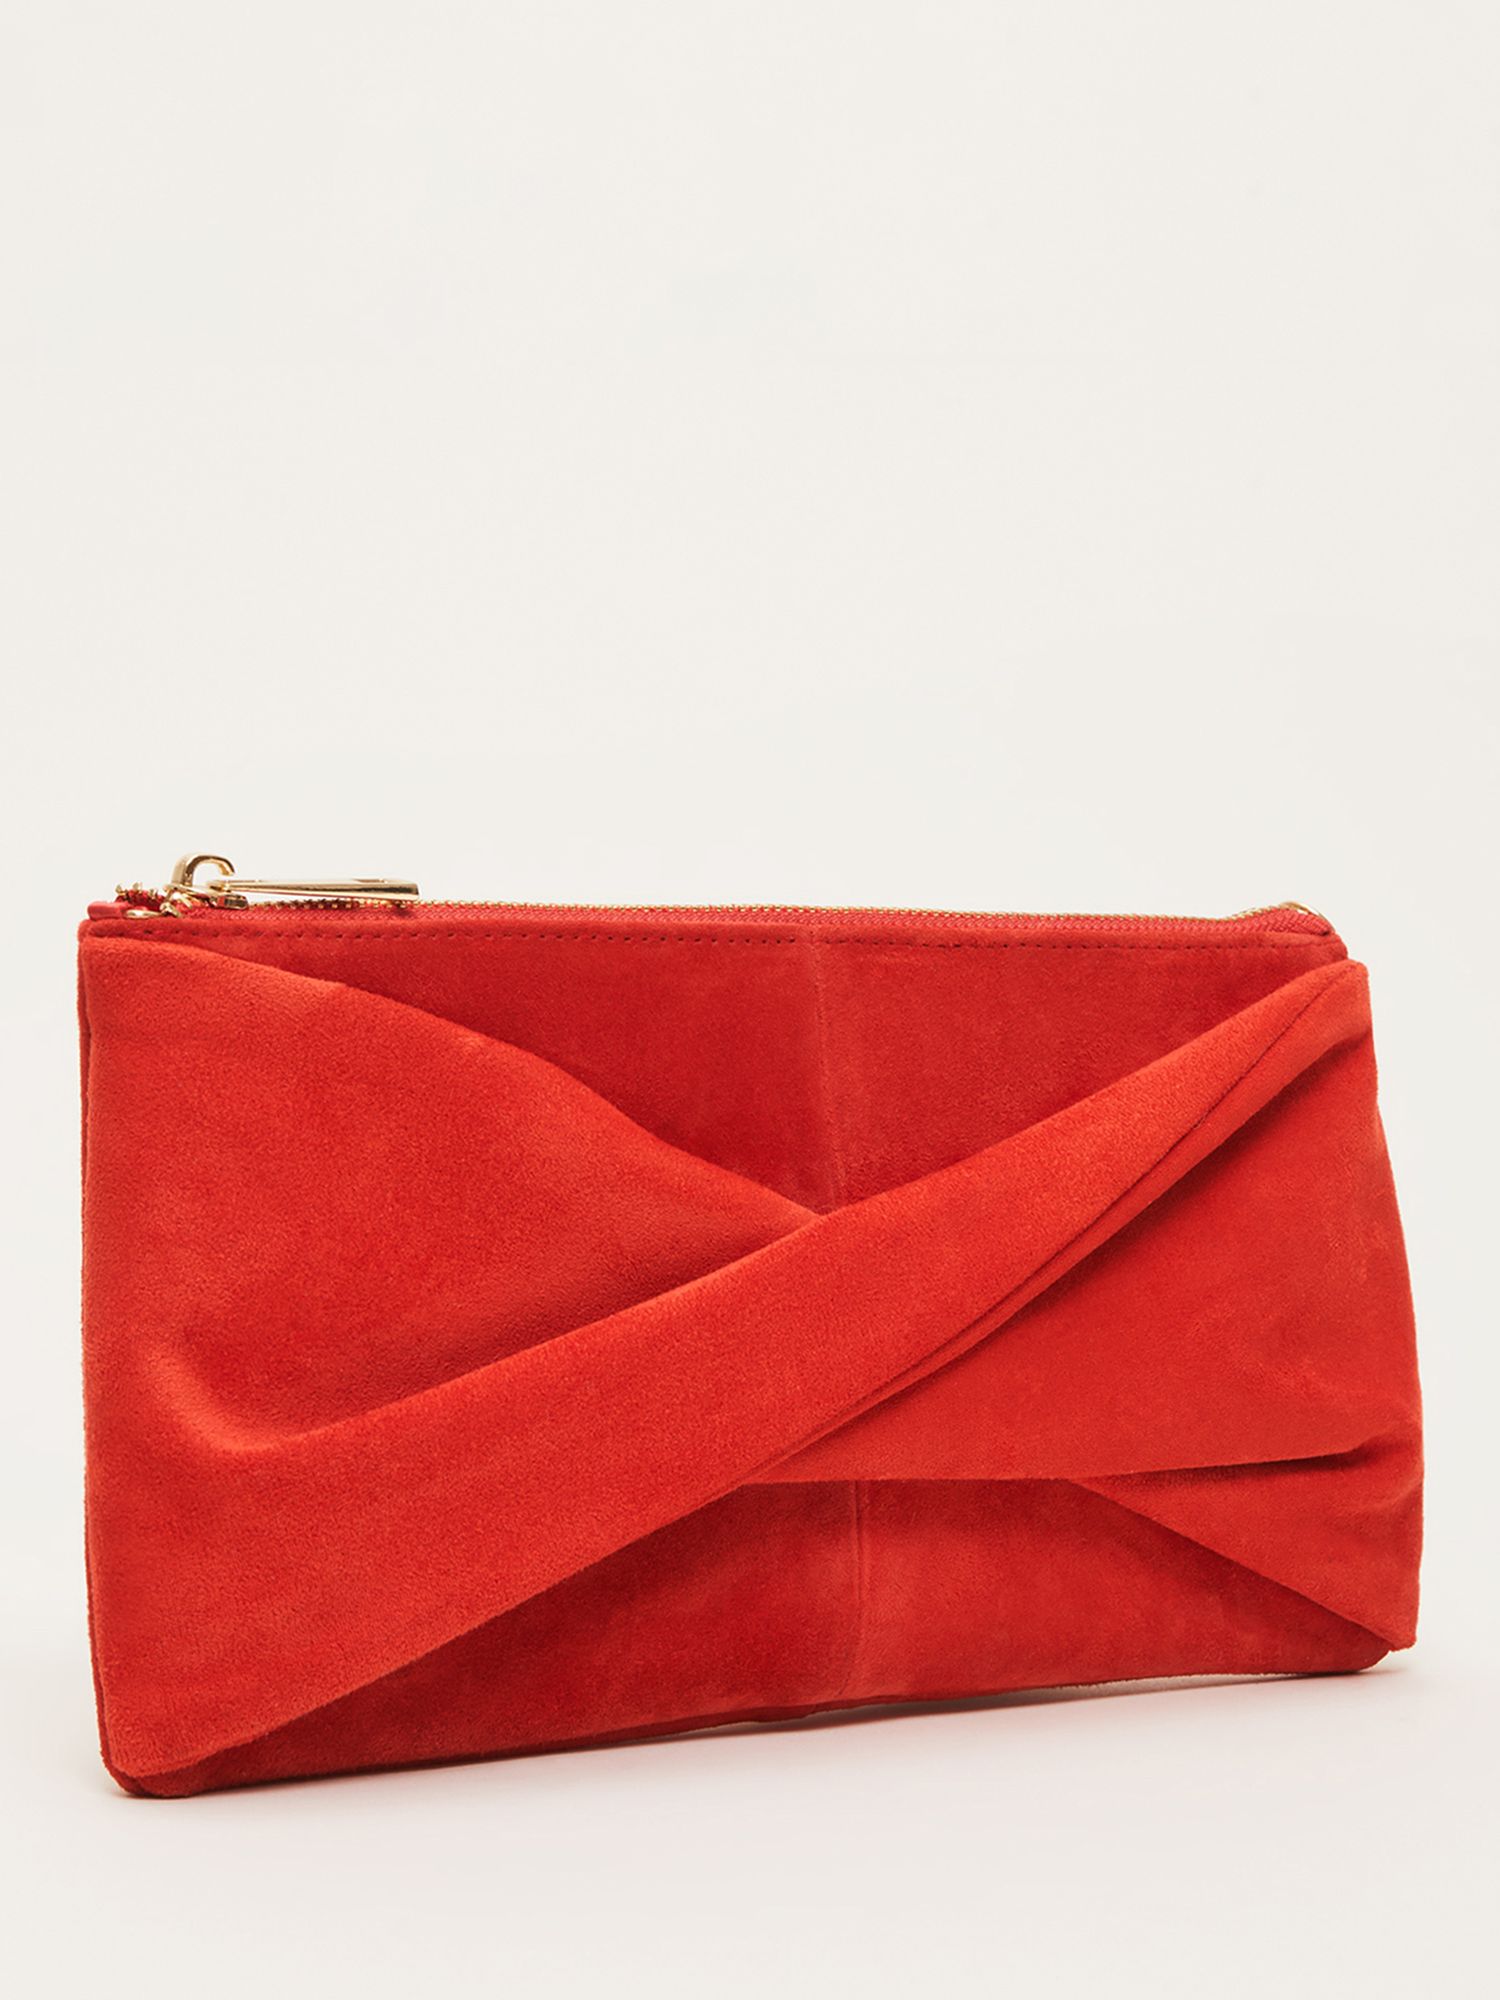 Phase Eight Suede Twist Front Clutch Bag, Red at John Lewis & Partners